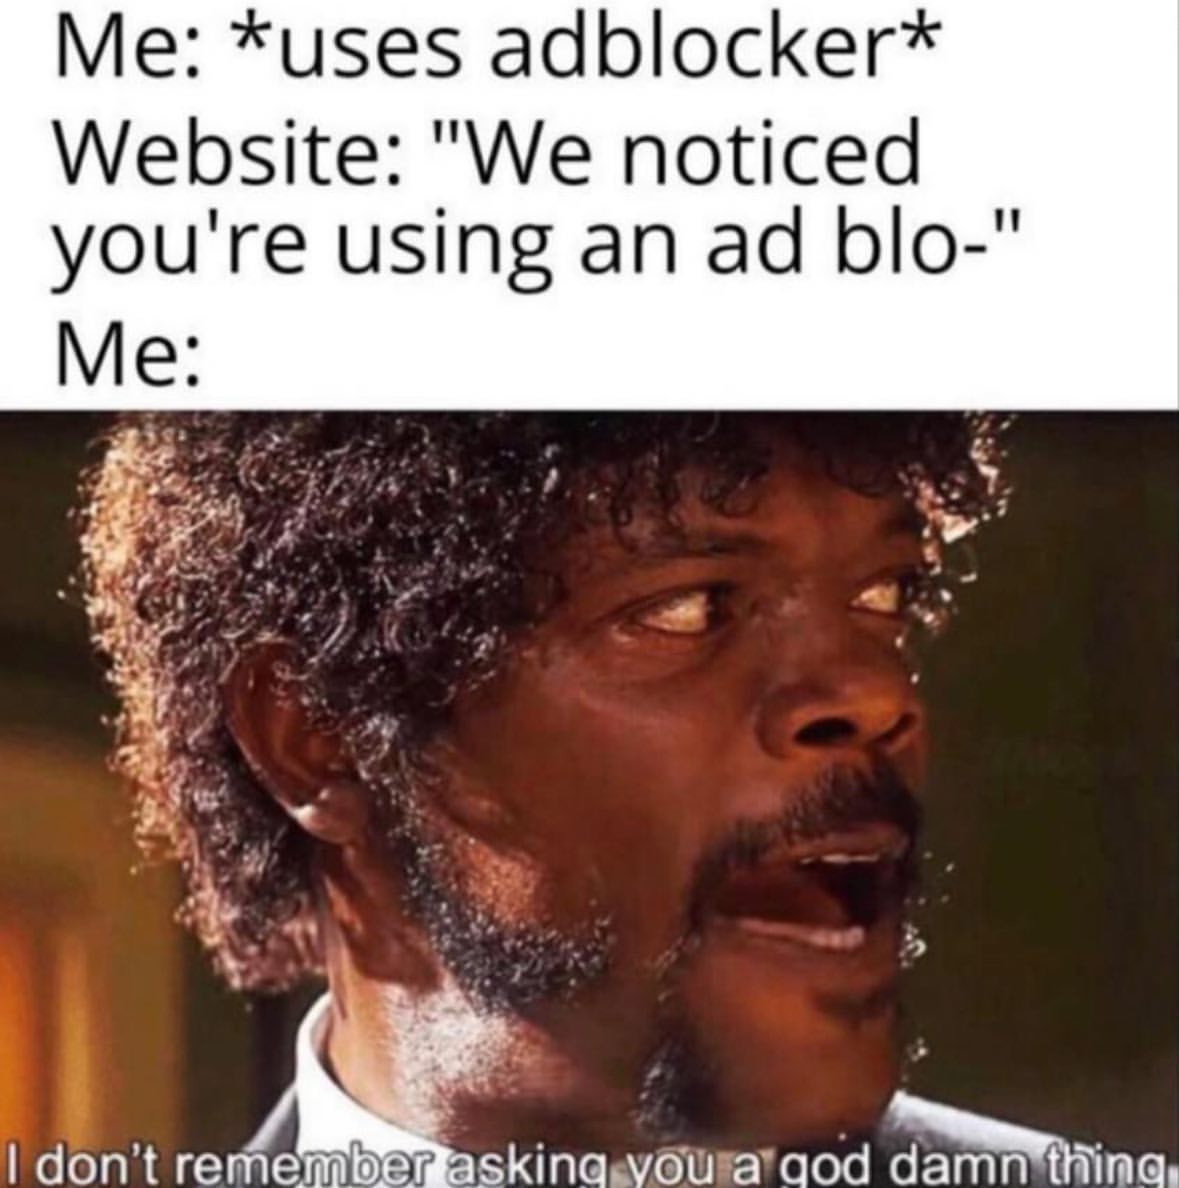 Me: *Uses adblocker* Website: "We noticed you're using an ad blo-" I don't remember asking you a good damn thing.